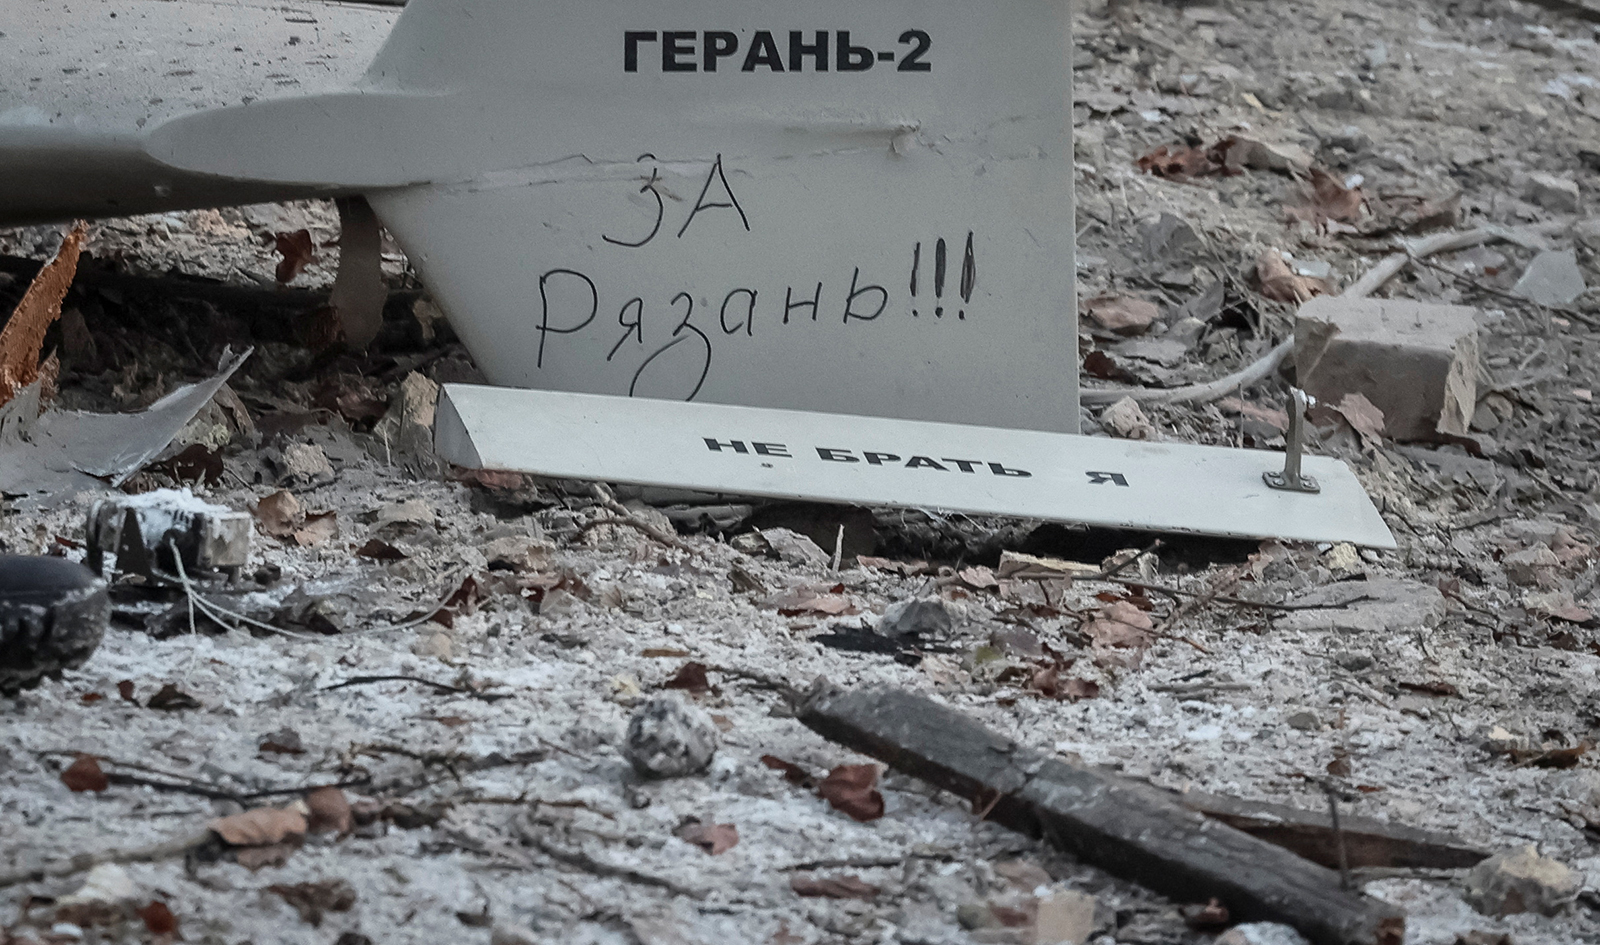 Parts of a drone with "For Ryazan" written in Russian on it are seen at the site of a building damaged by a drone attack in Kyiv on Wednesday.